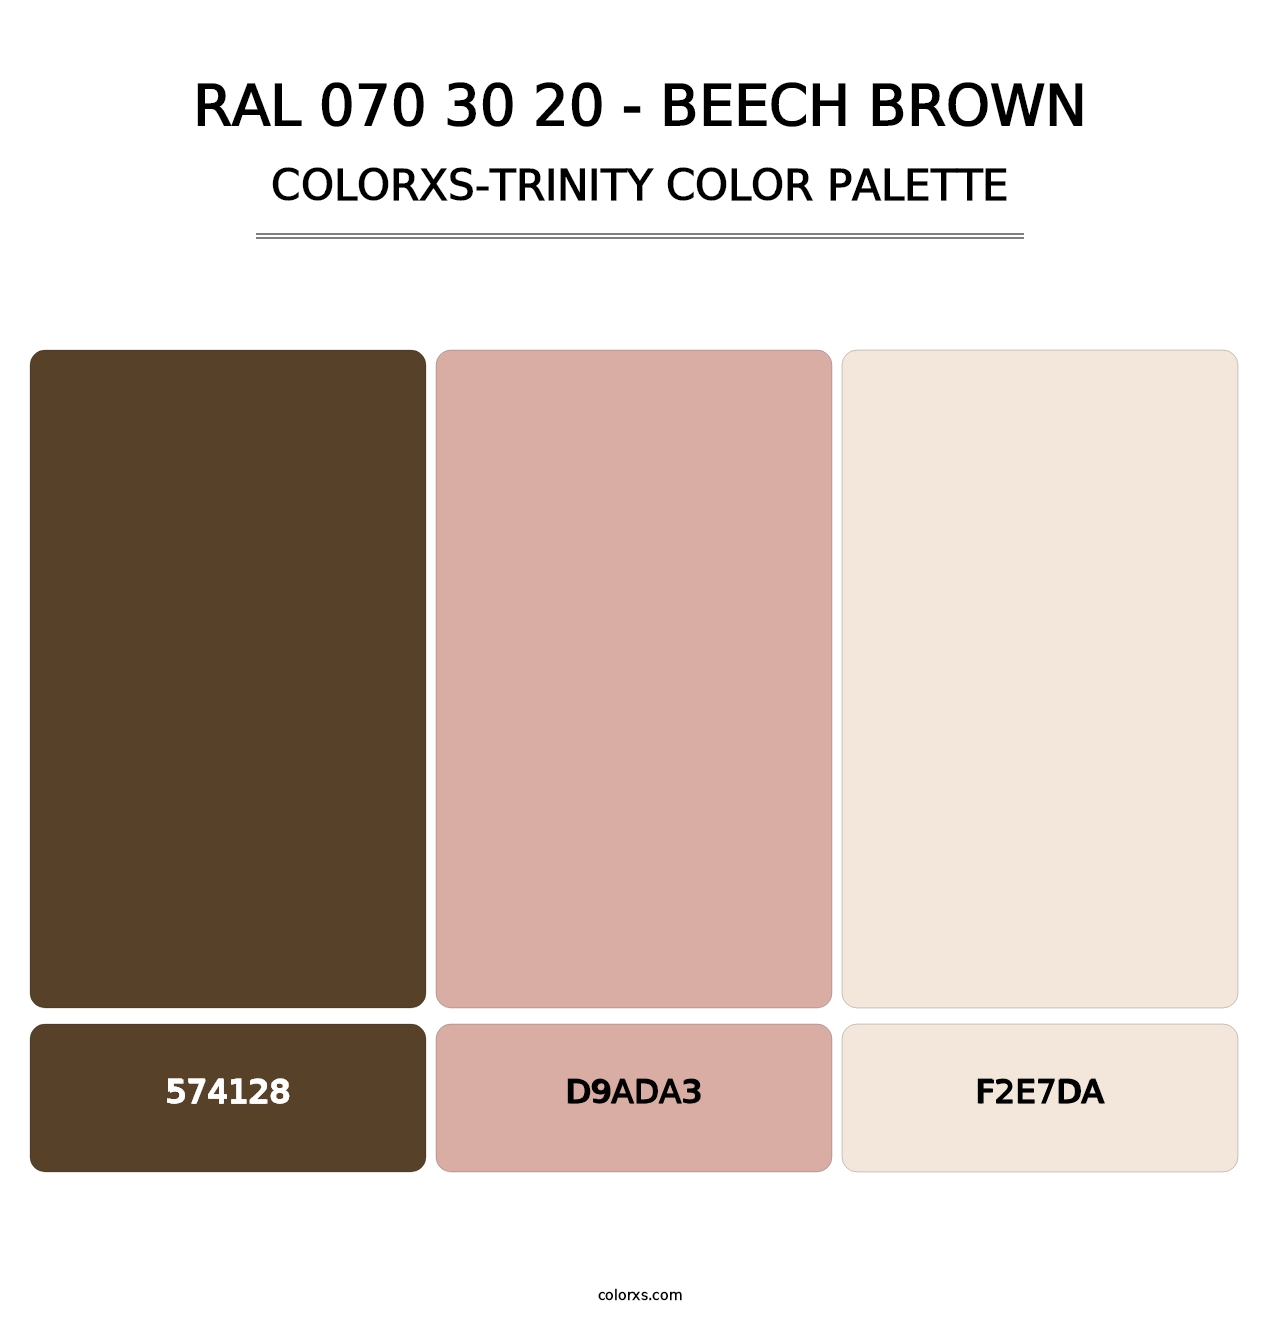 RAL 070 30 20 - Beech Brown - Colorxs Trinity Palette